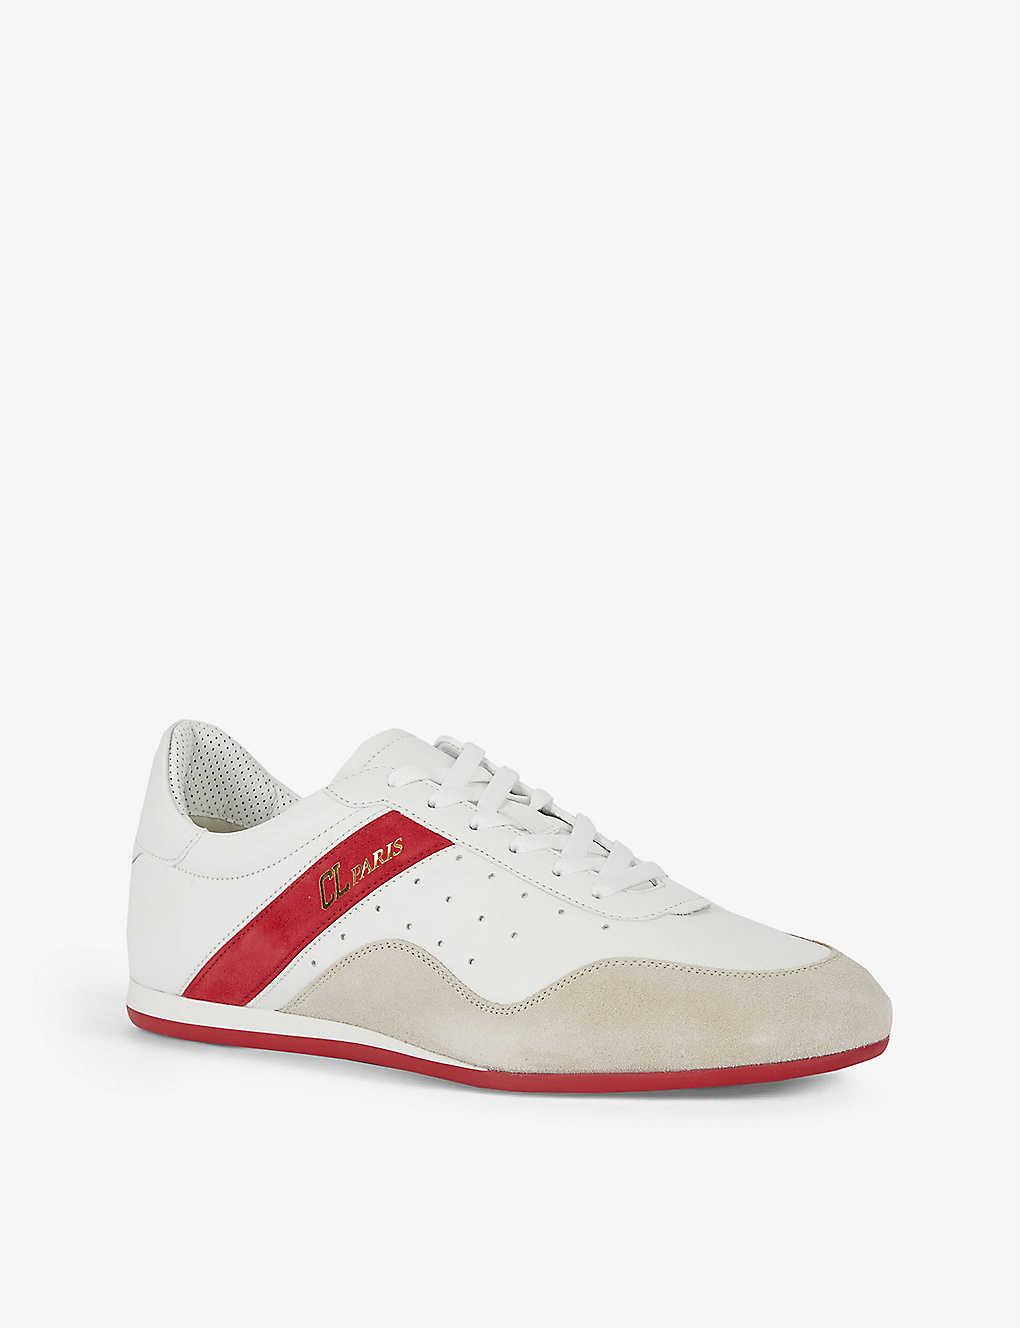 Christian Louboutin Leather Womens Version White My K Low Donna 